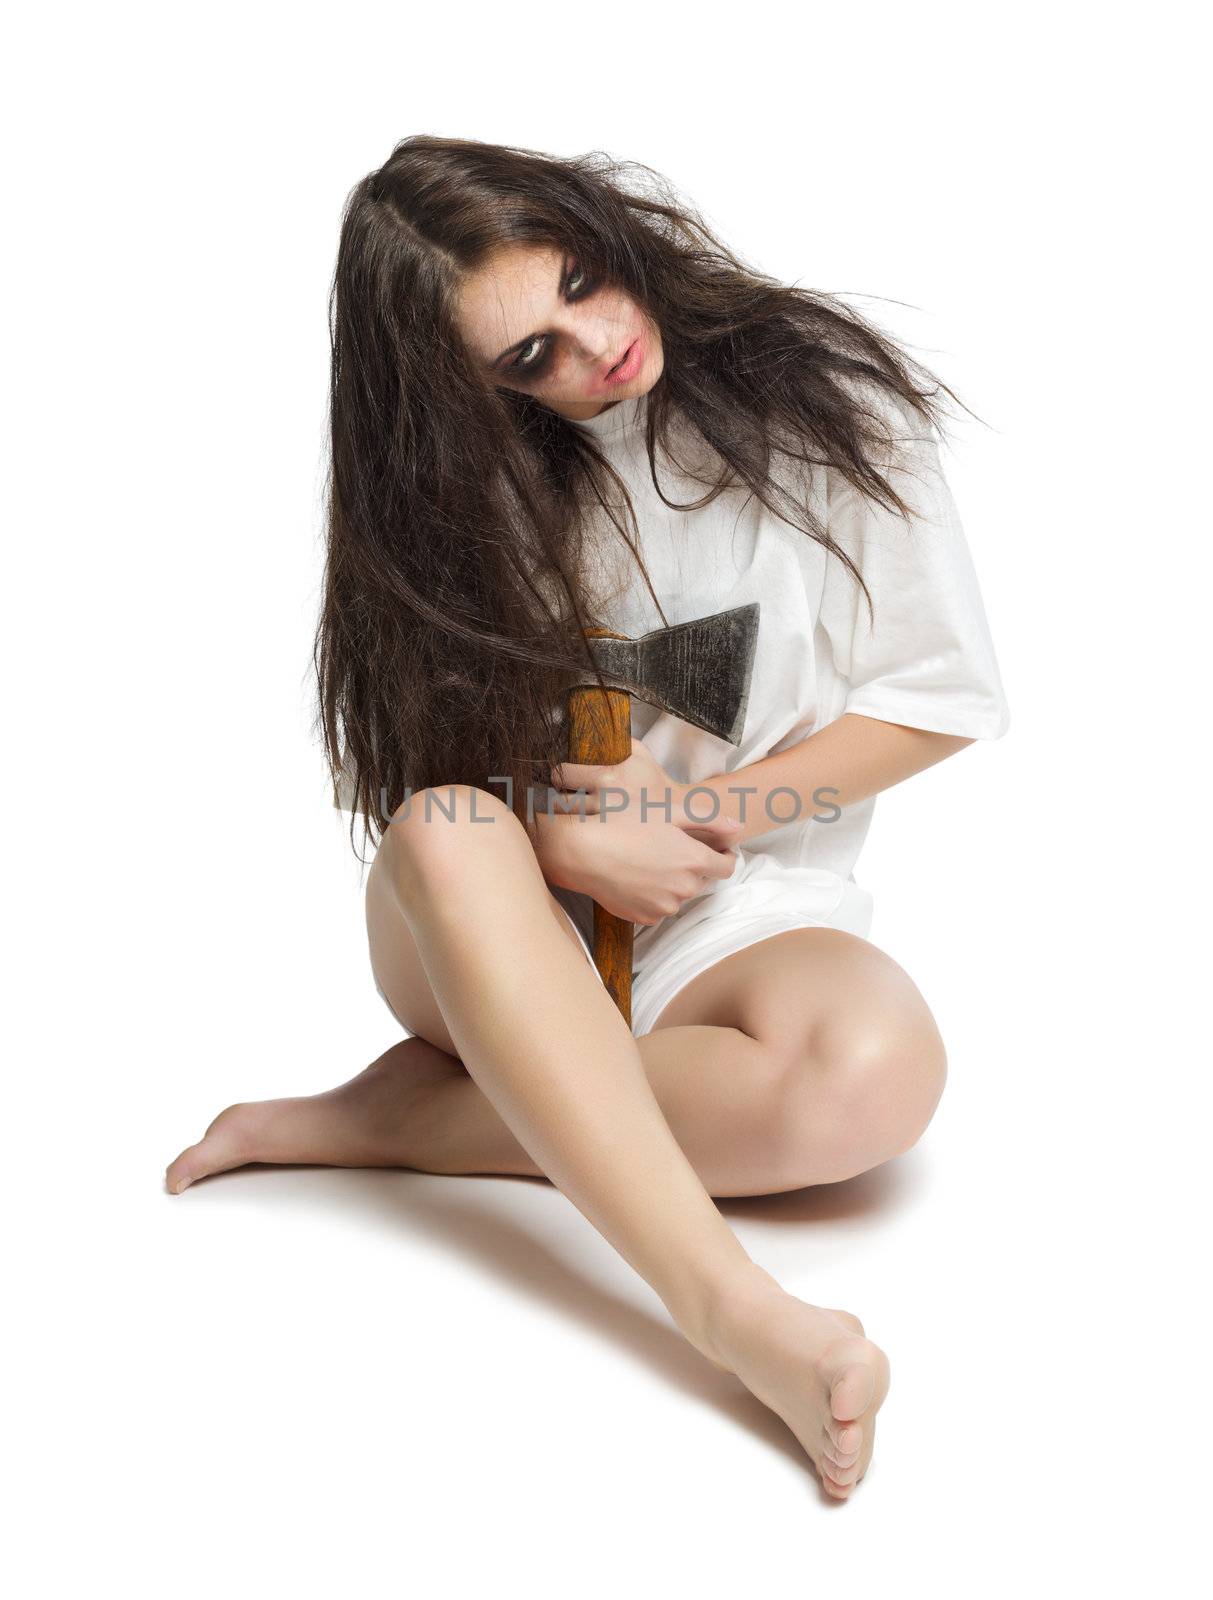 Zombie girl with axe isolated